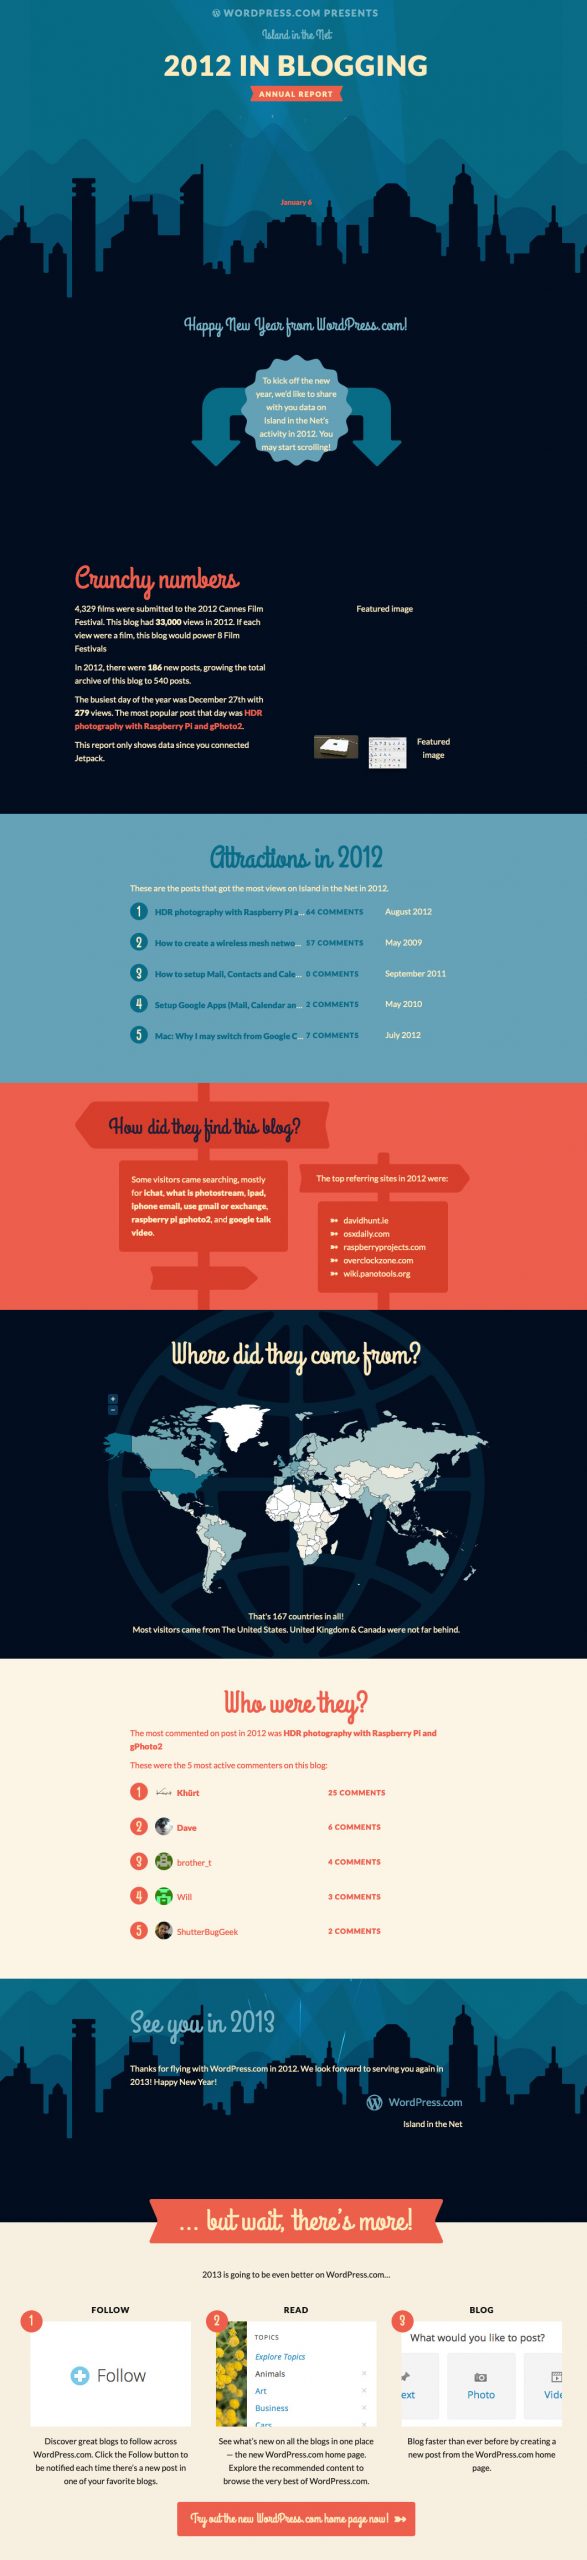 2012 year in blogging Annual Report